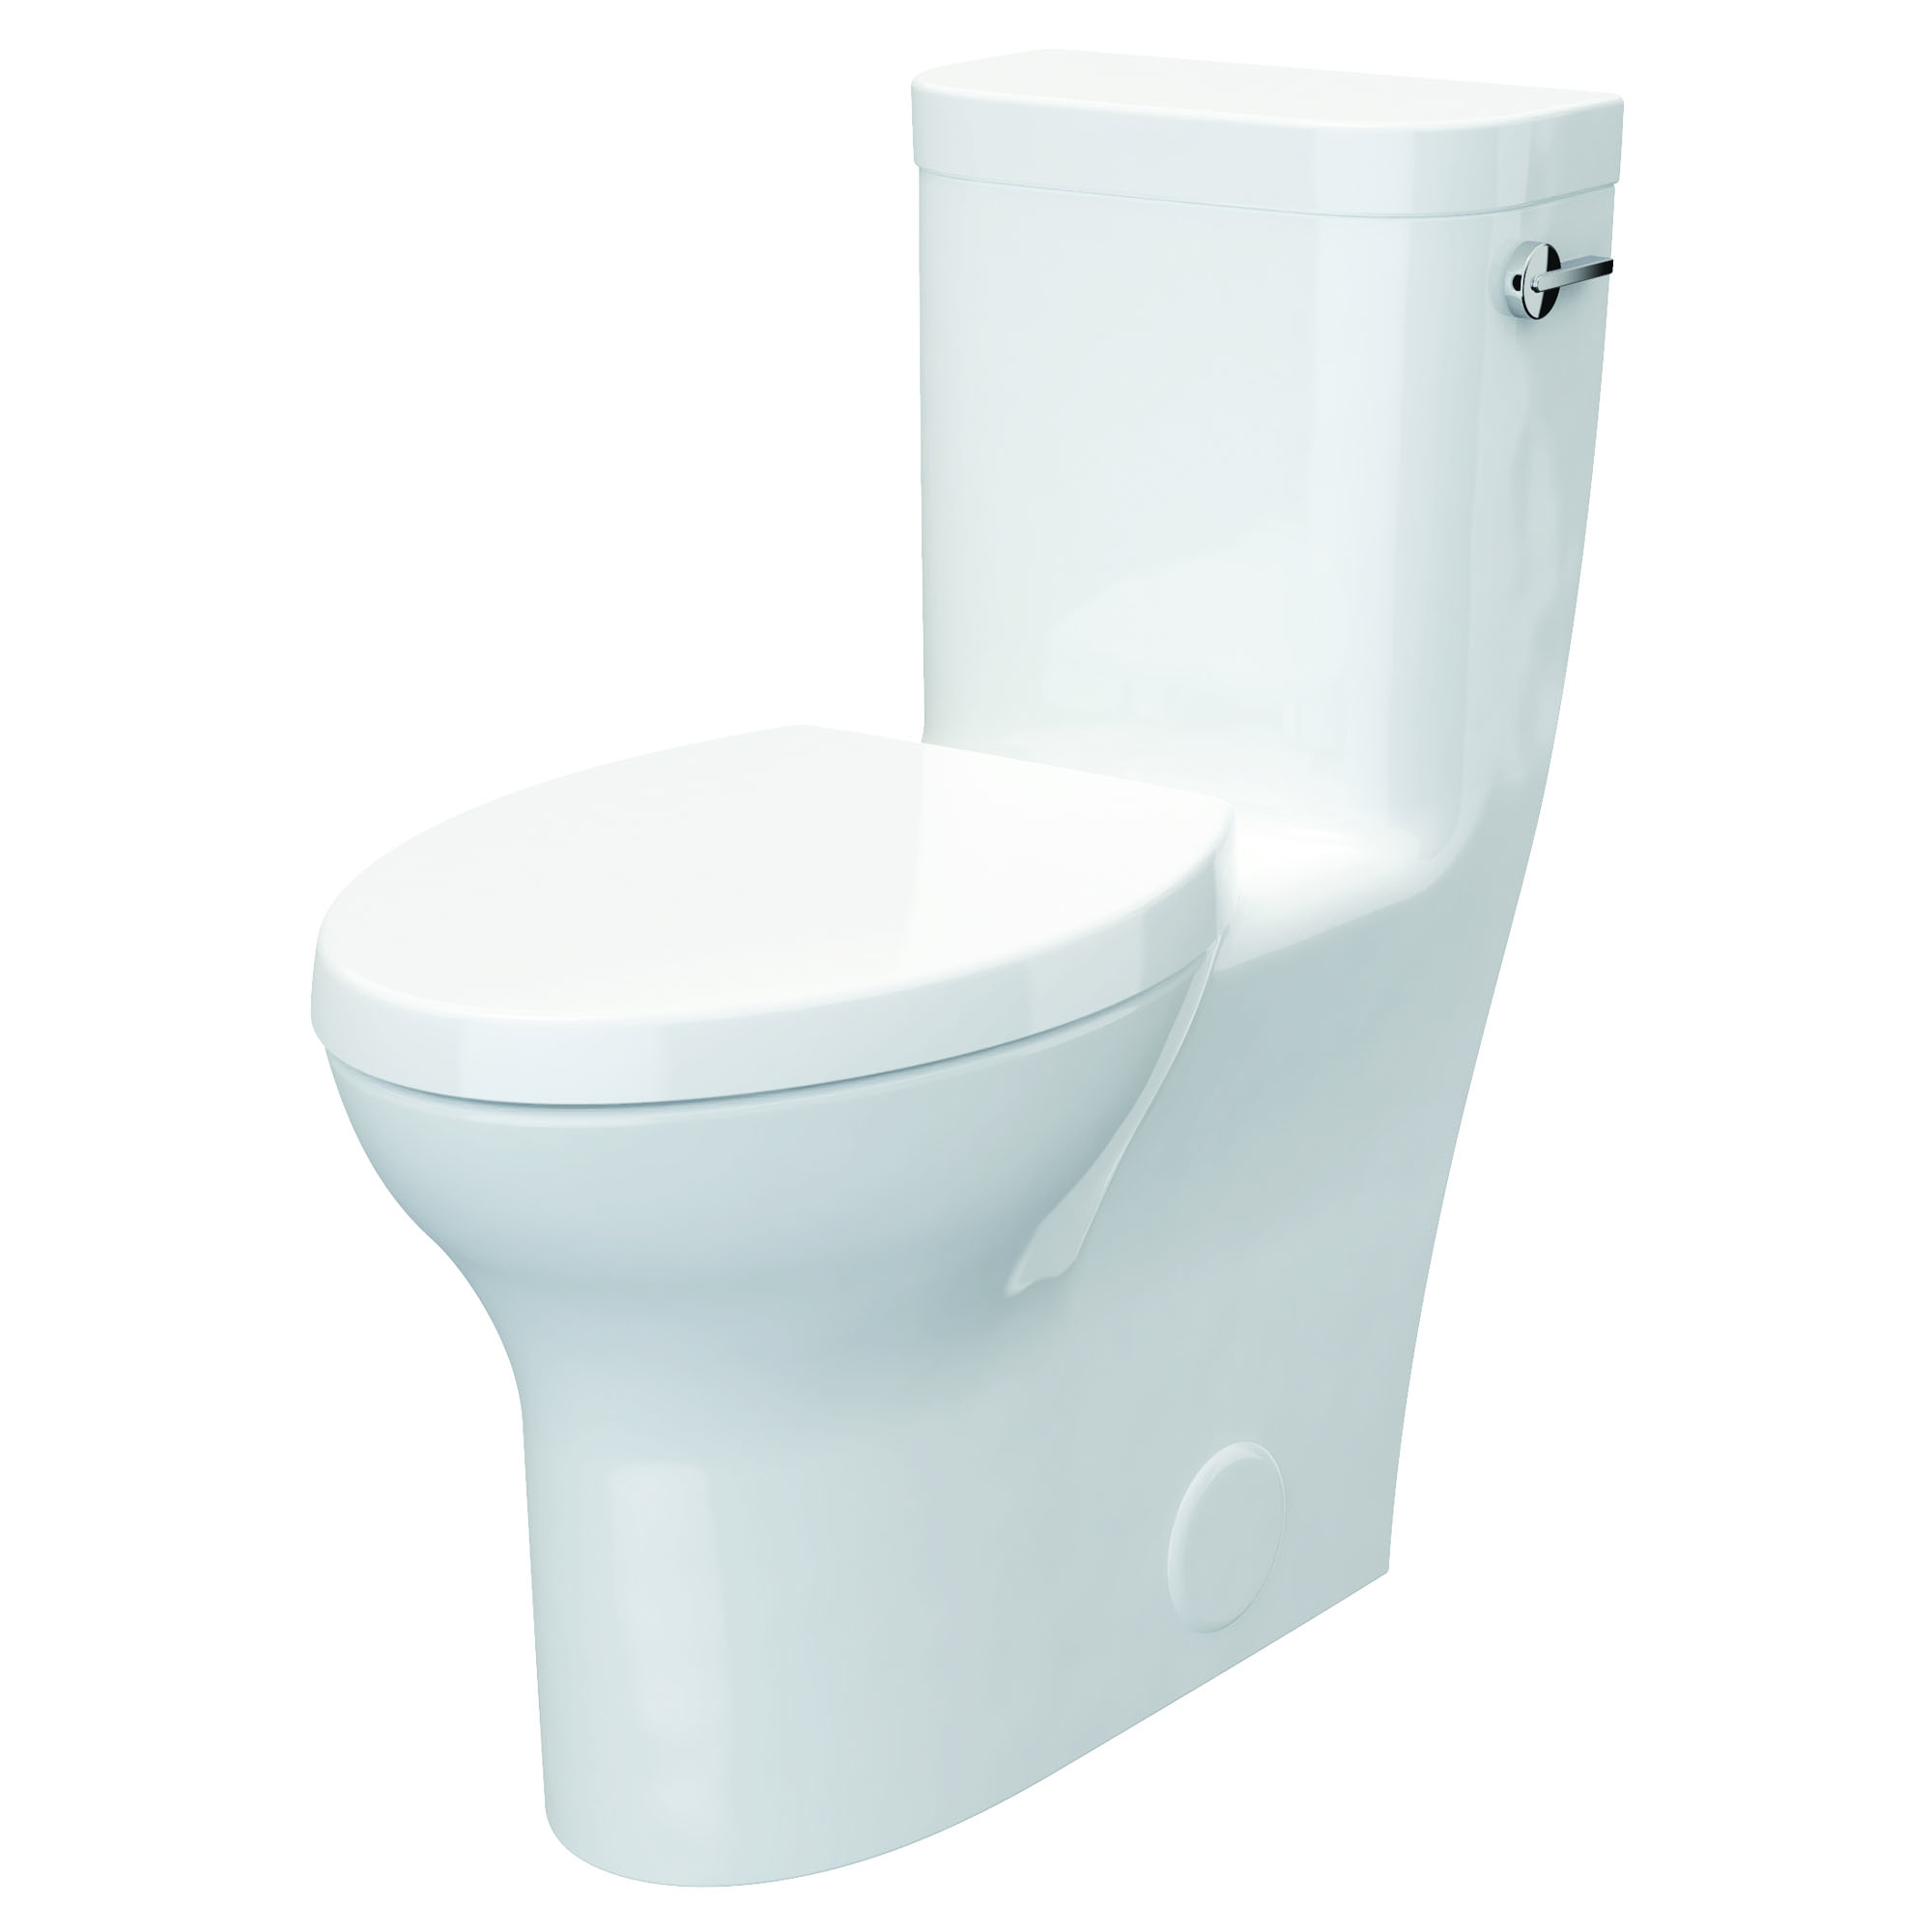 Equility One-Piece Chair Height Right Hand Trip Lever Elongated Toilet with Seat